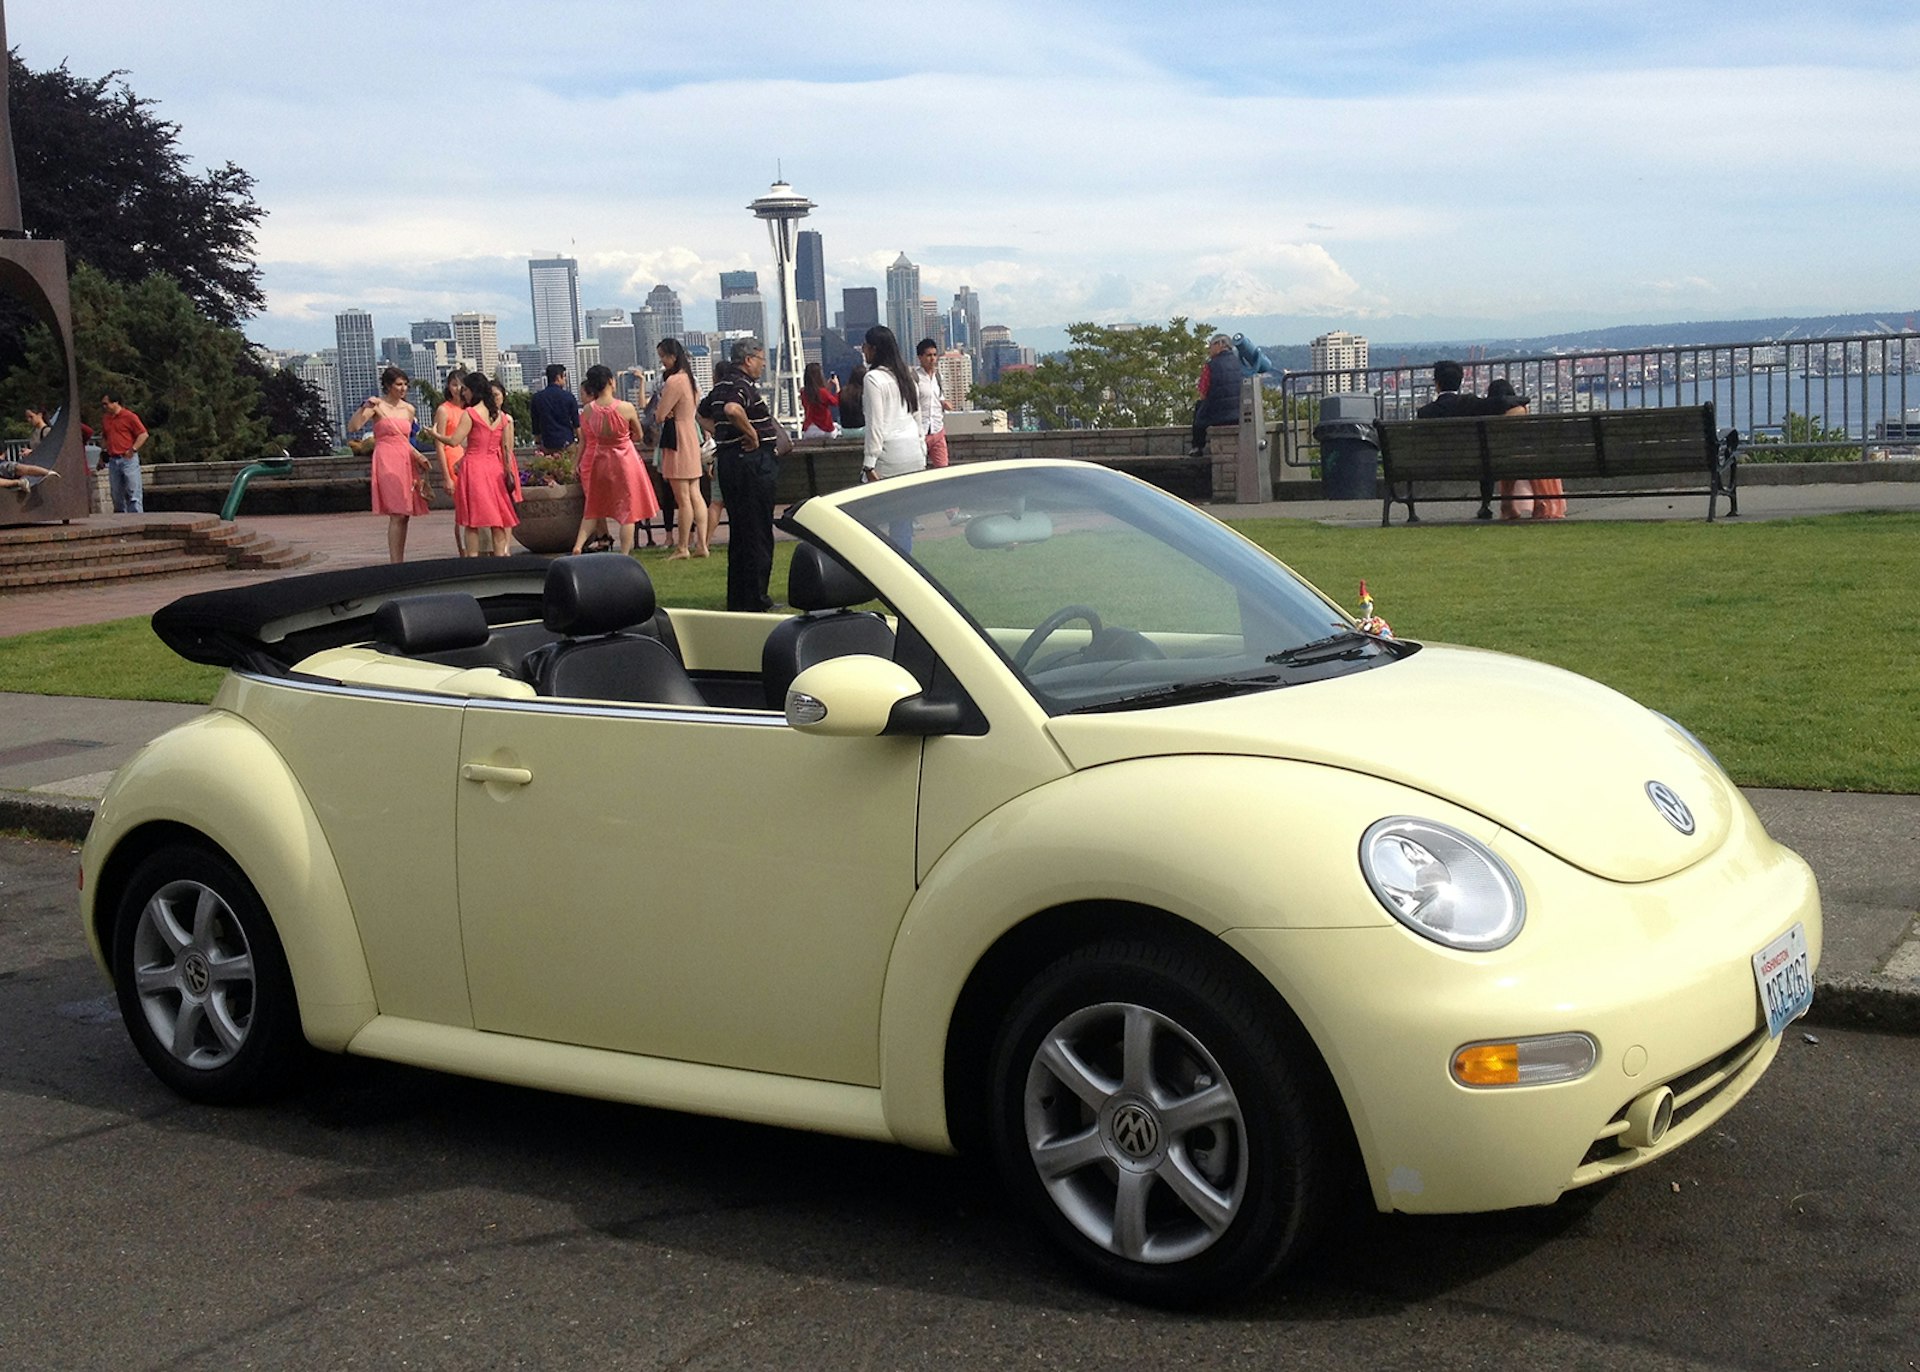 The Campbells sold most of their possessions, including their VW Beetle, before setting out from their old home in Seattle © Debbie and Michael Campbell